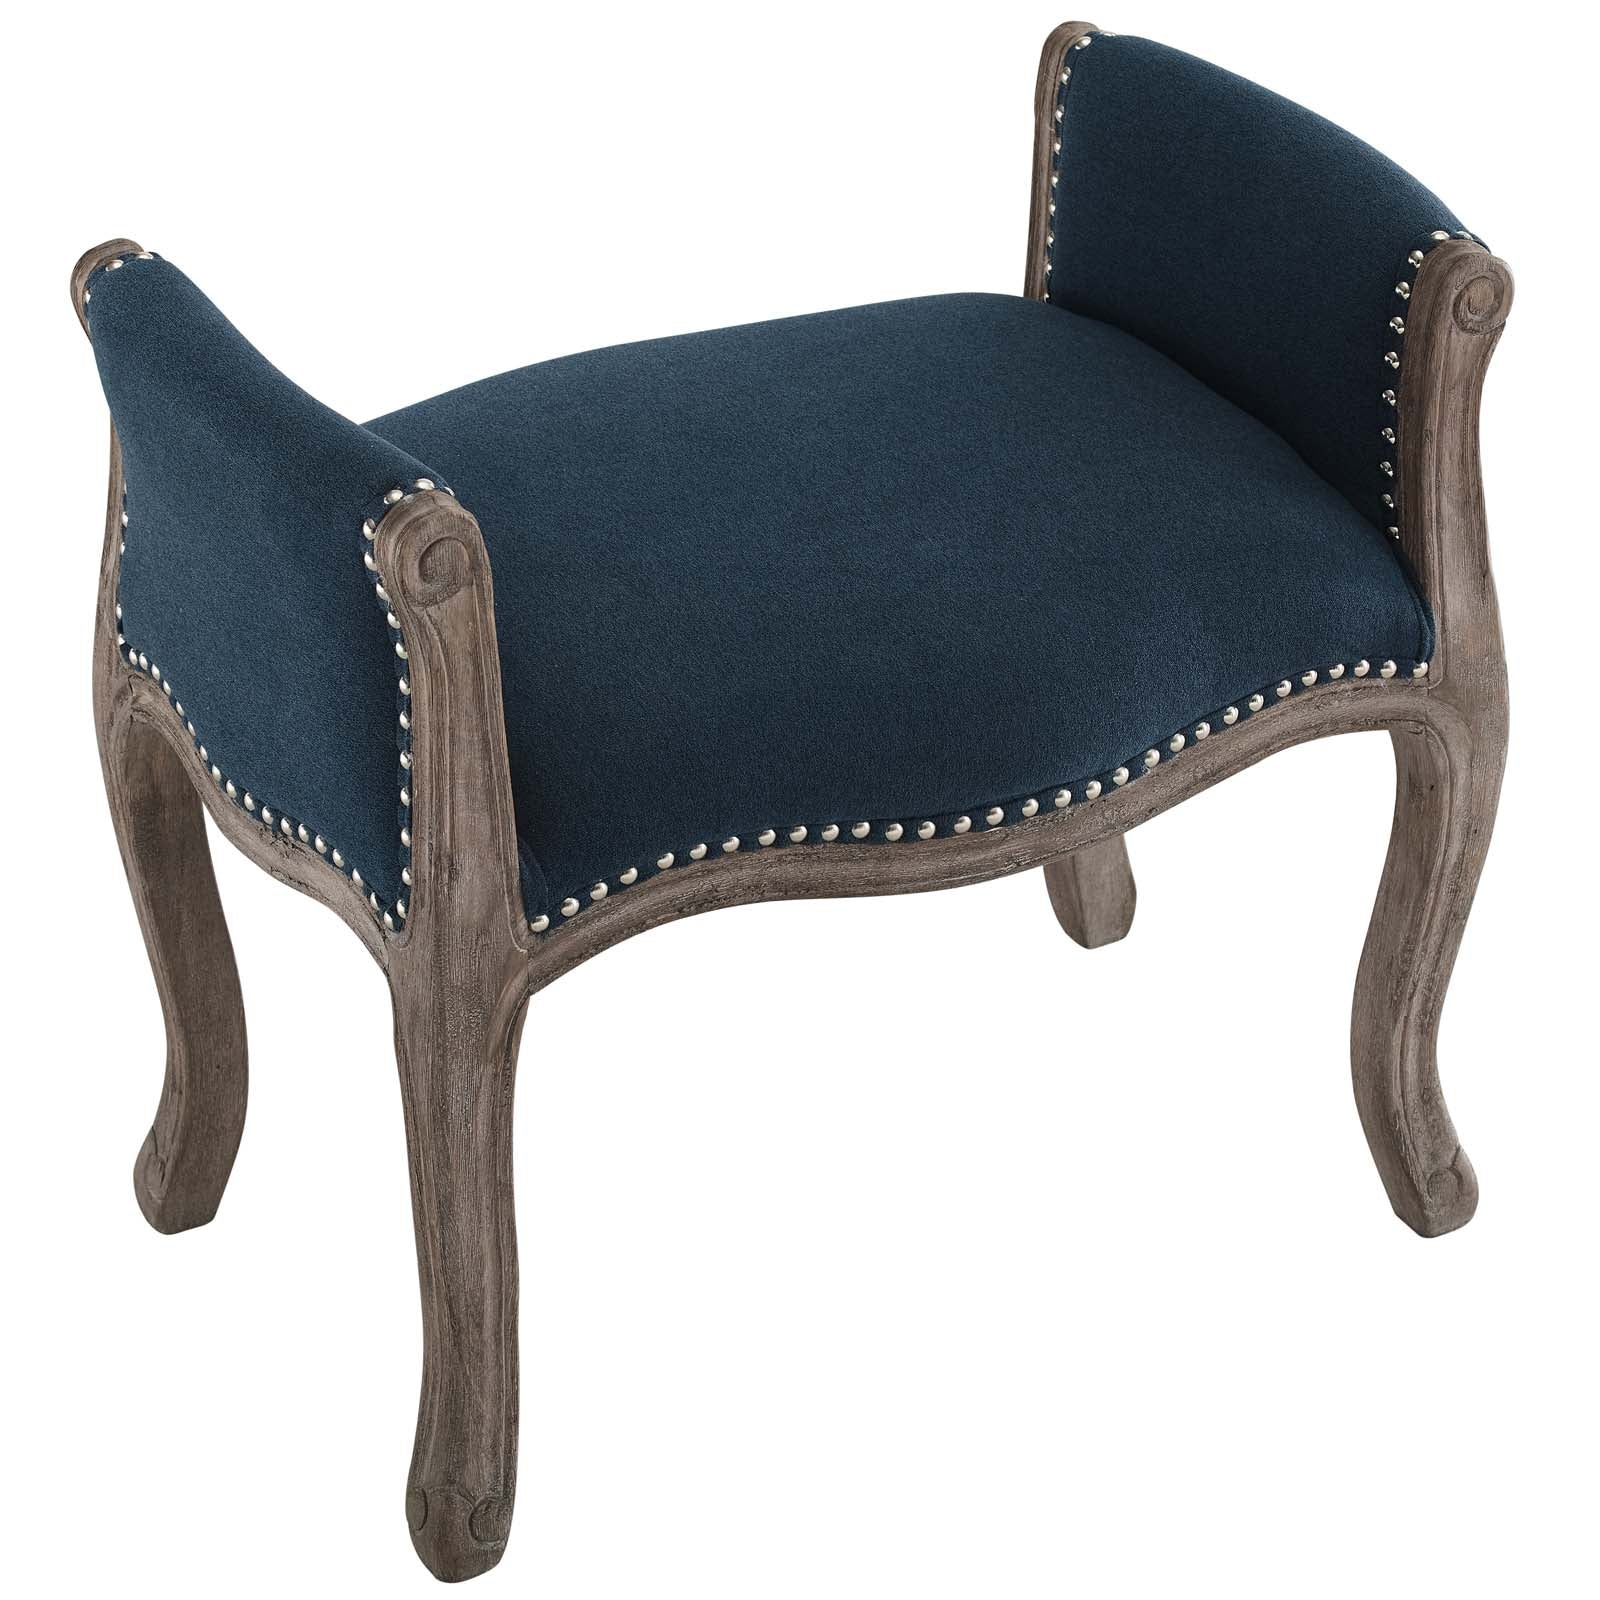 Avail Vintage French Upholstered Fabric Bench - East Shore Modern Home Furnishings